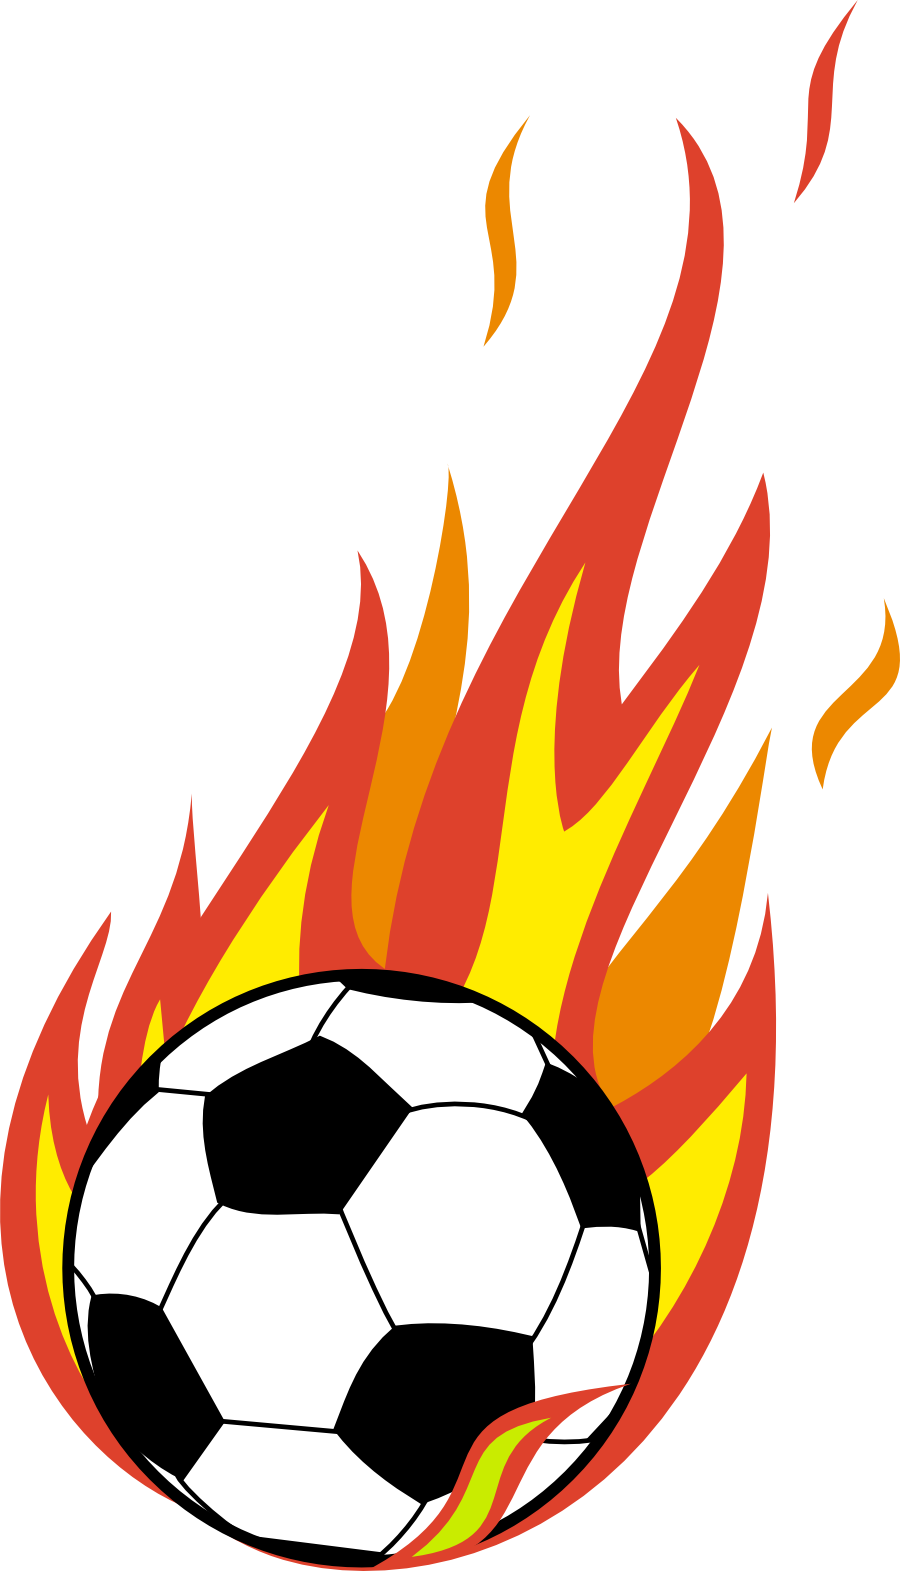 Free Soccer Ball with Flames Clipart Image